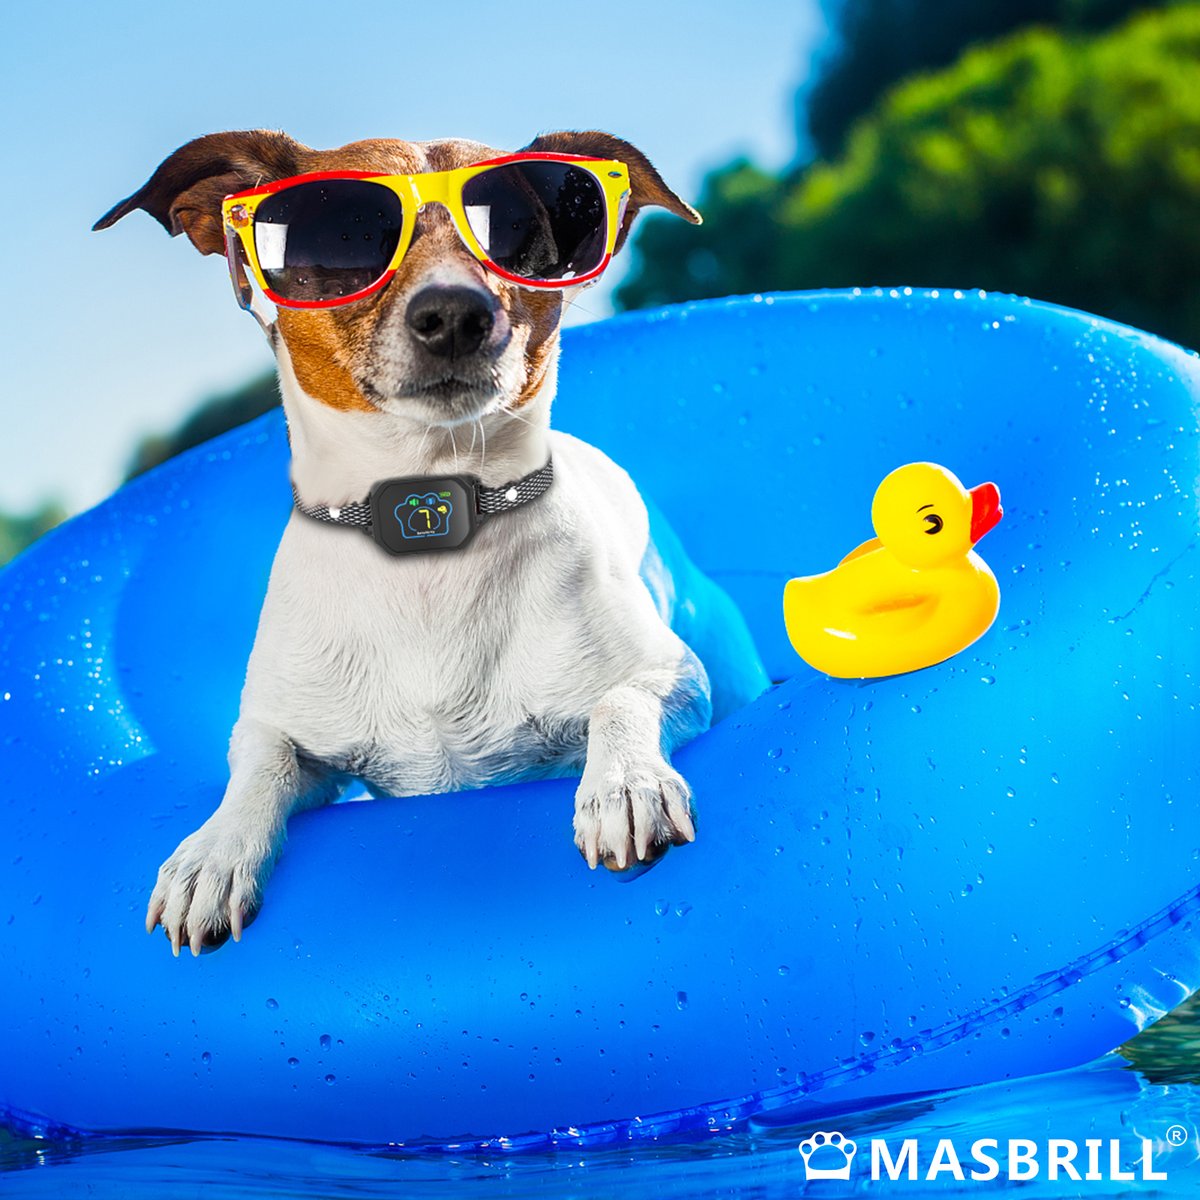 What can dog water sports🏊 be without #Masbrill Color Screen Waterproof Anti-Bark Collar❄❄❄
masbrill.us

#dog #dogs #doglover #doglife #dogsofinstagram #dogloversofinstagram #dogstagram #dogsoffacebook #collar #barkcollar #cooldog #Waterproof #colarscreen